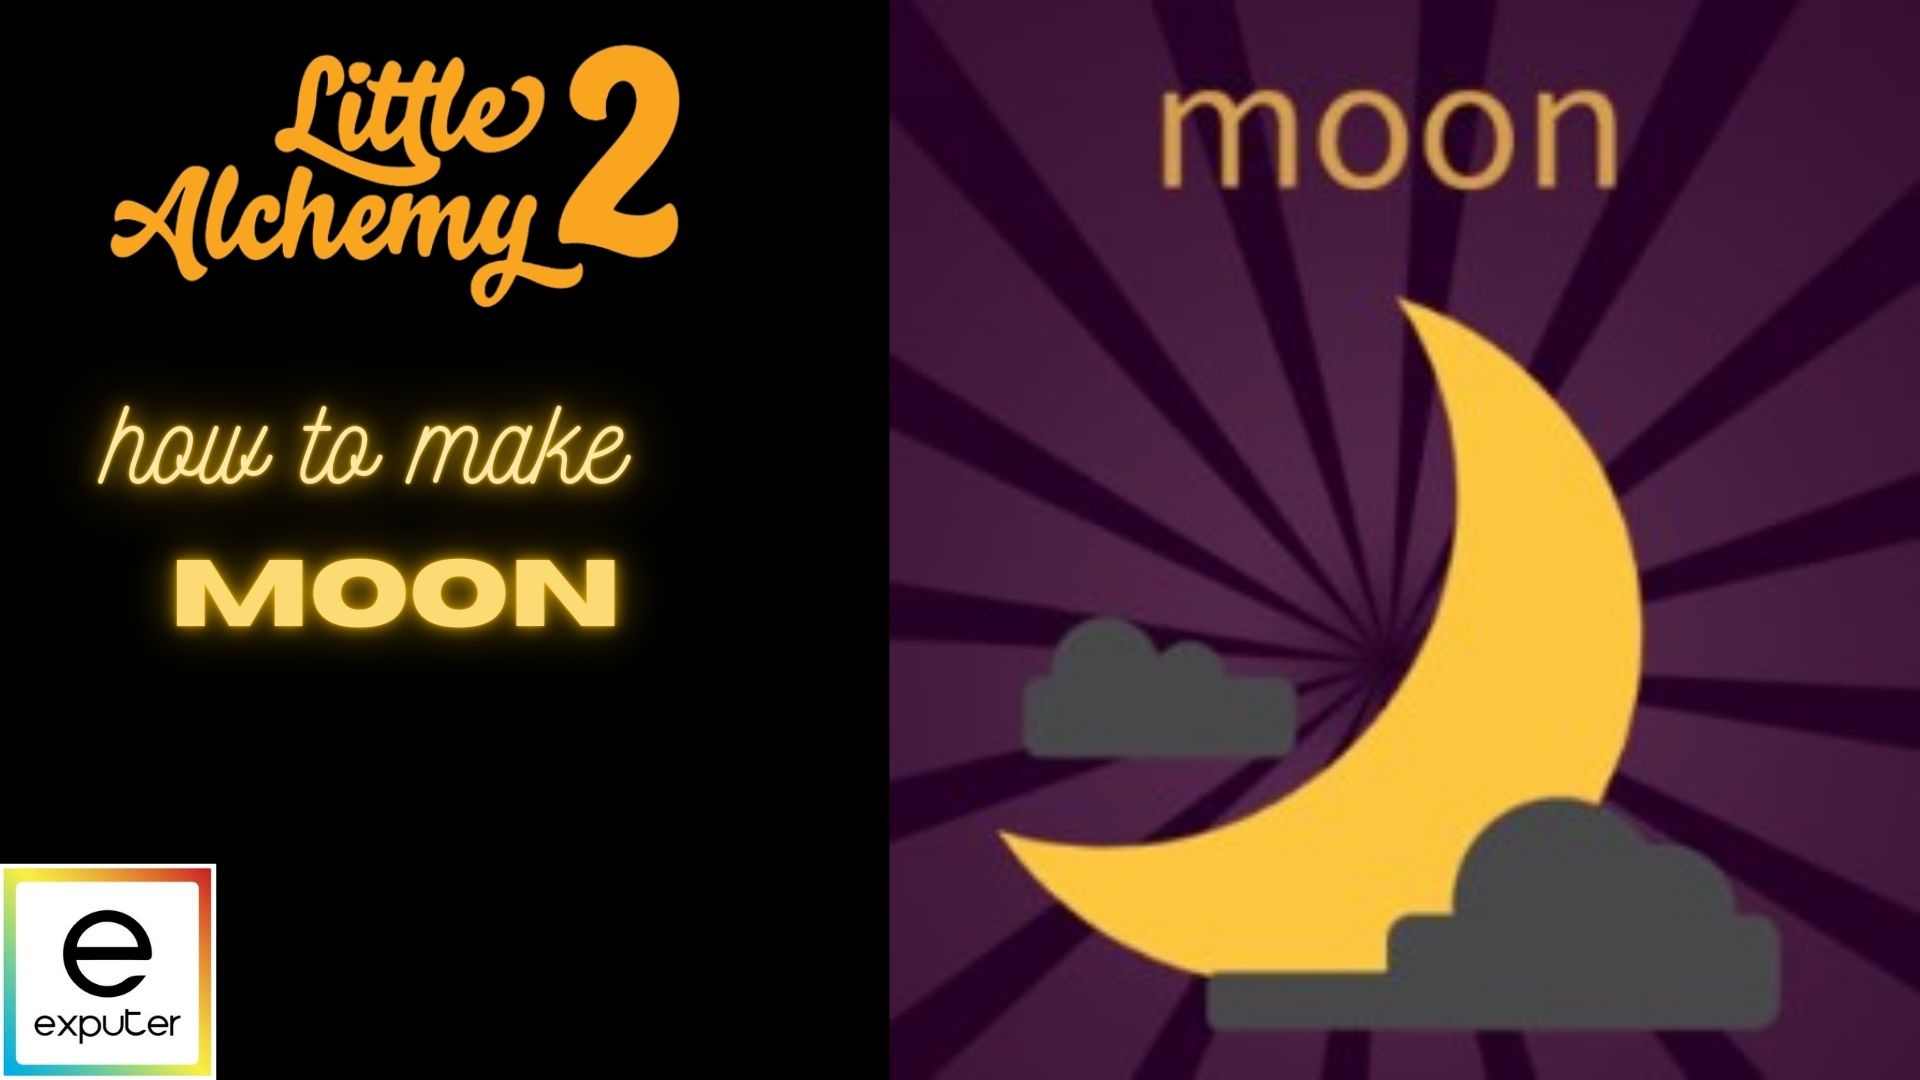 How to make moon - Little Alchemy 2 Official Hints and Cheats